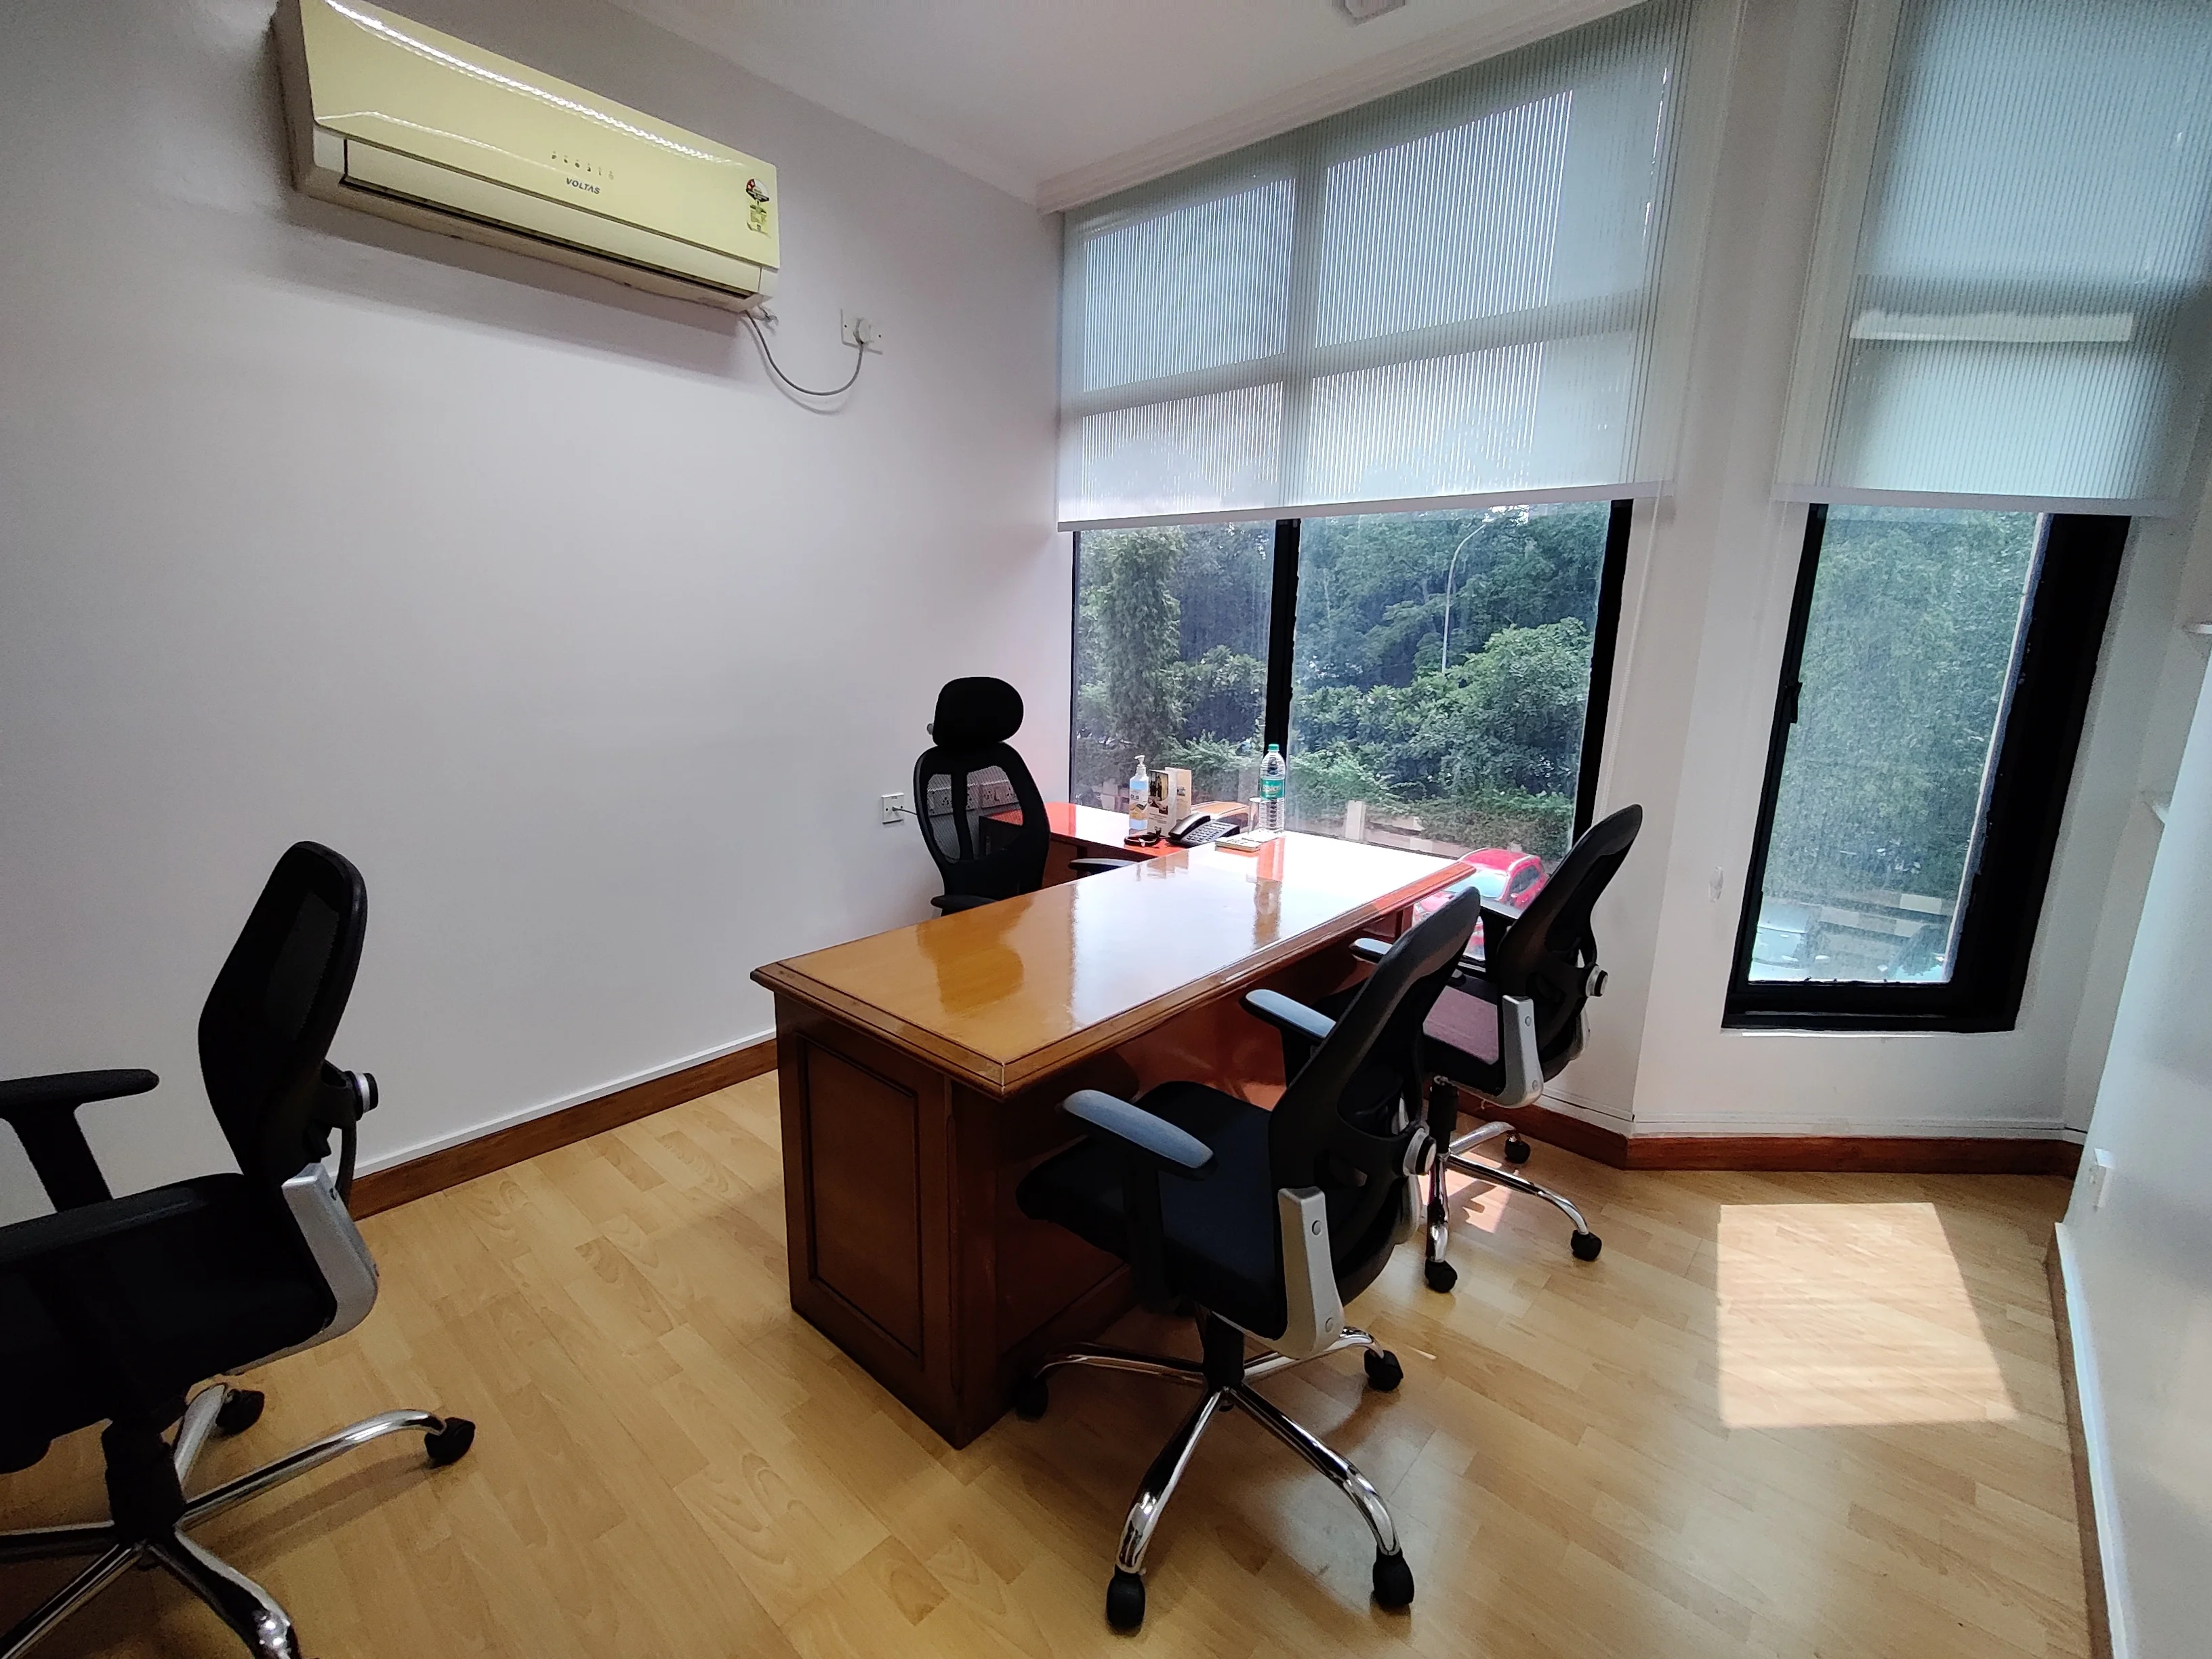 office space for rent in delhi